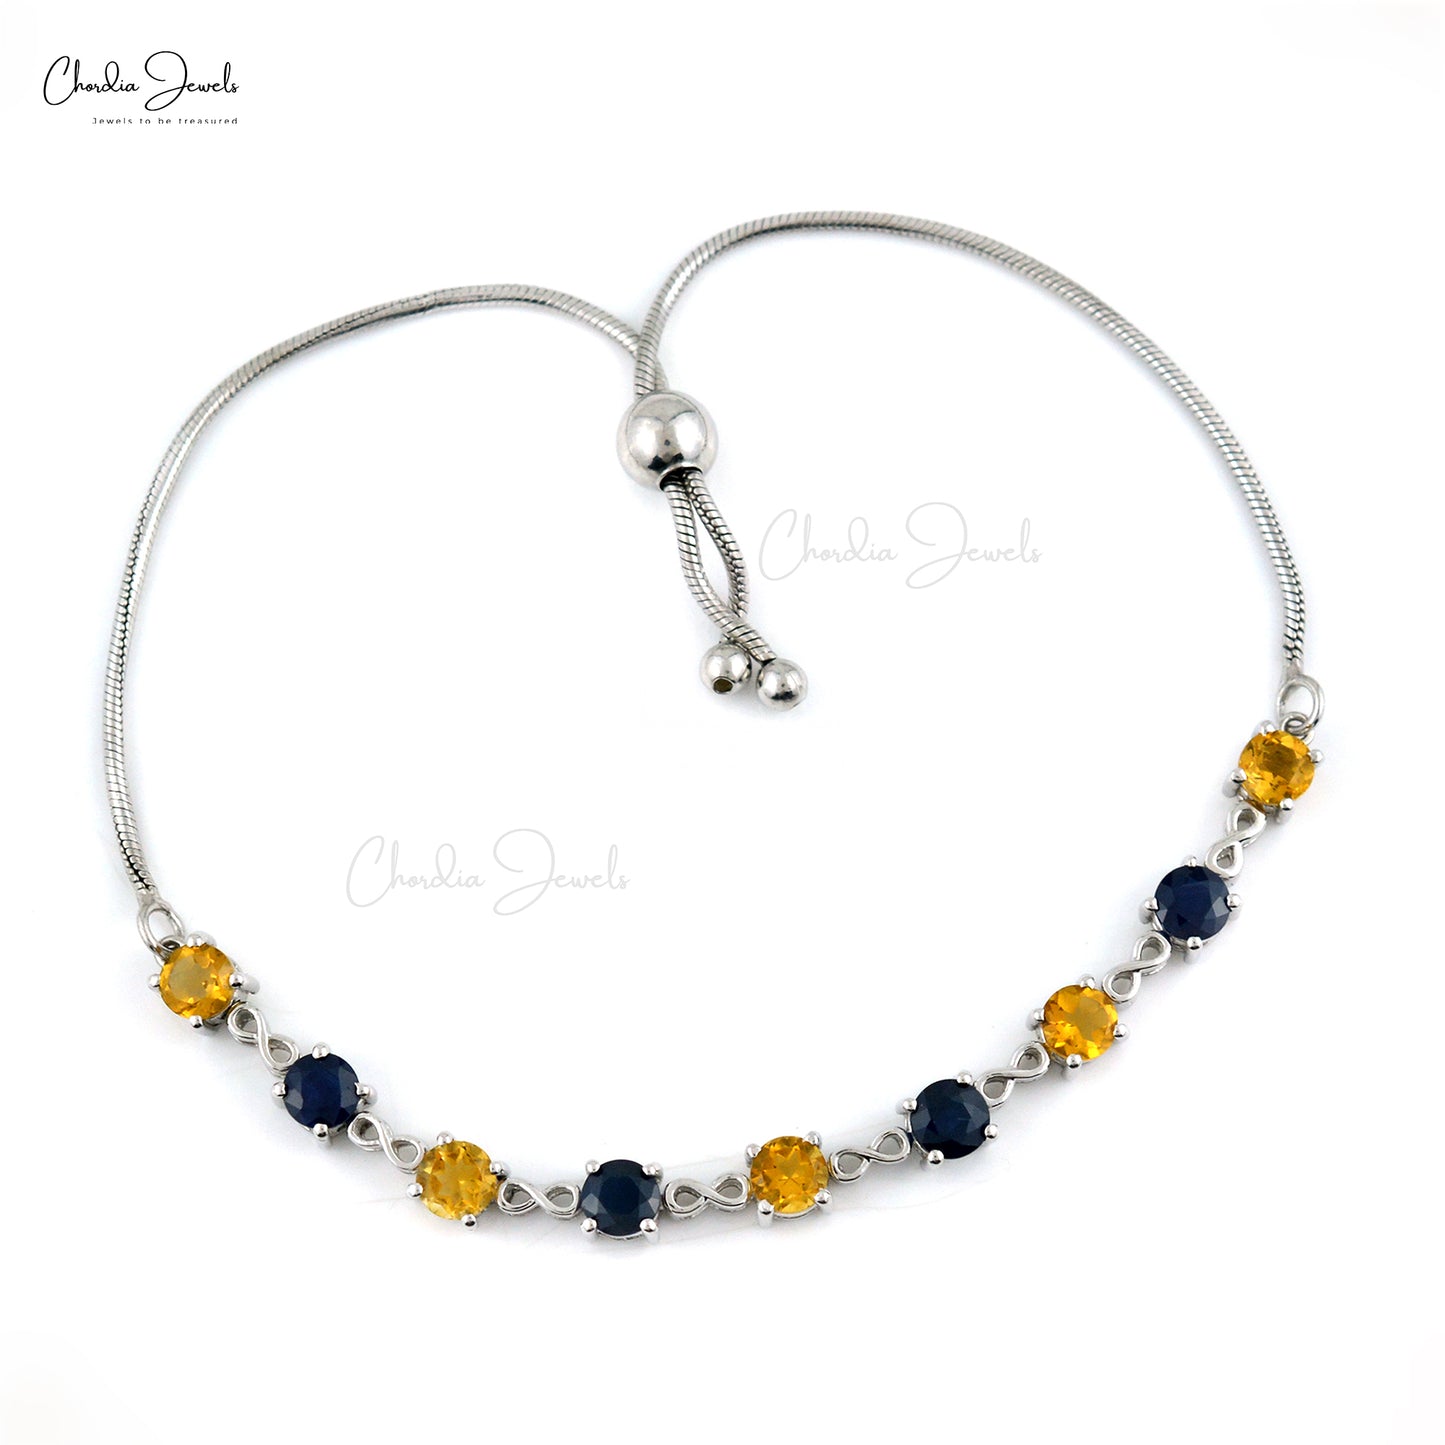 Natural Citrine & Blue Sapphire 4.5mm Round Cut Gemstone Flexible Bracelet Hot Selling 925 Sterling Silver Fashion Jewelry At Factory Cost